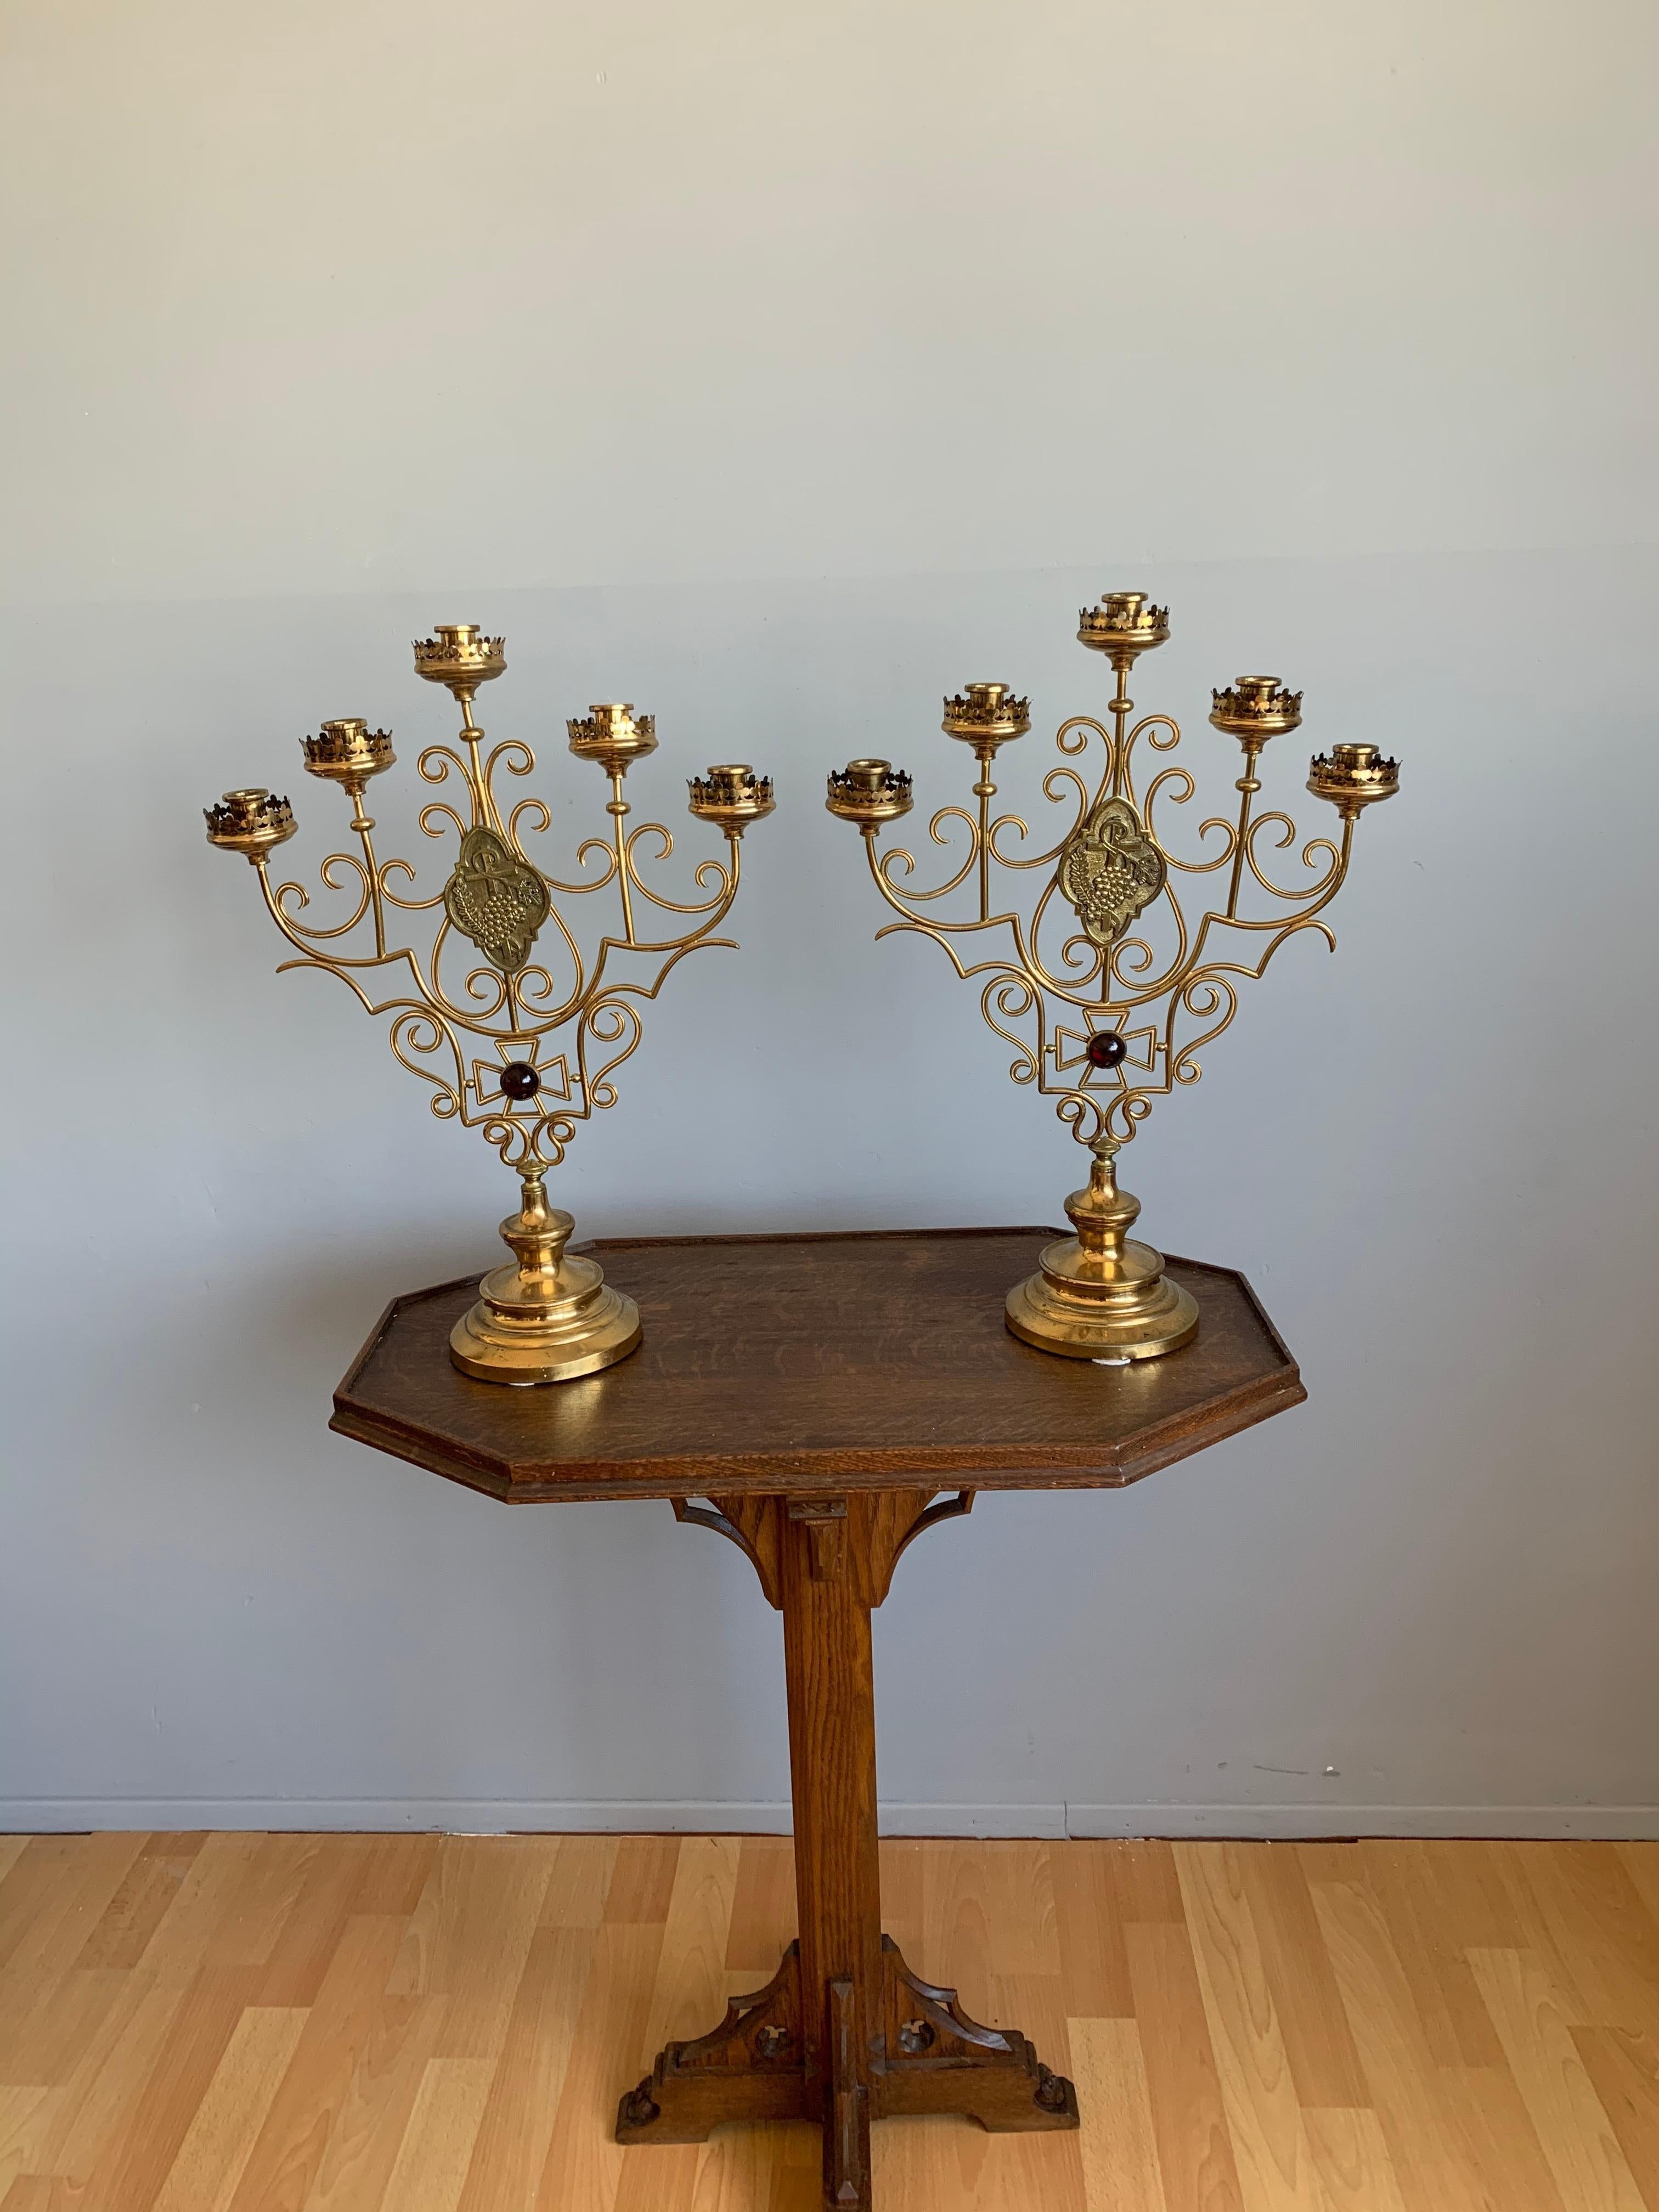 Stylish and very decorative pair of antique church candleholders. 

If you are looking for stylish, practical and truly decorative candelabras then this antique pair could be perfect for you. All handcrafted in the early 1900s this pair holds five